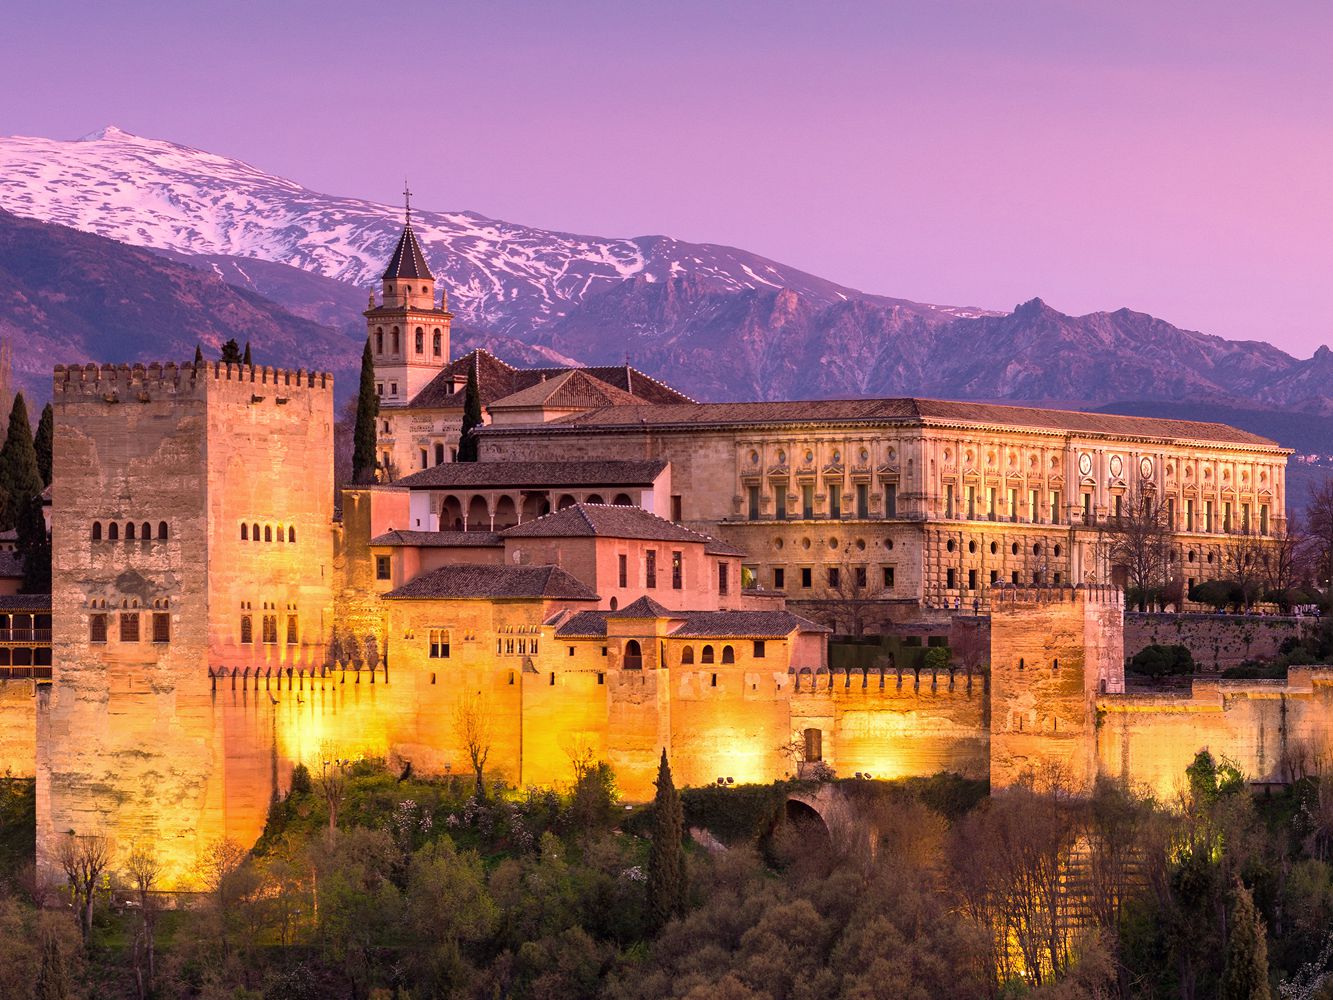 Alhambra, Palace in Granada, Spain. The best place to visit in Spain